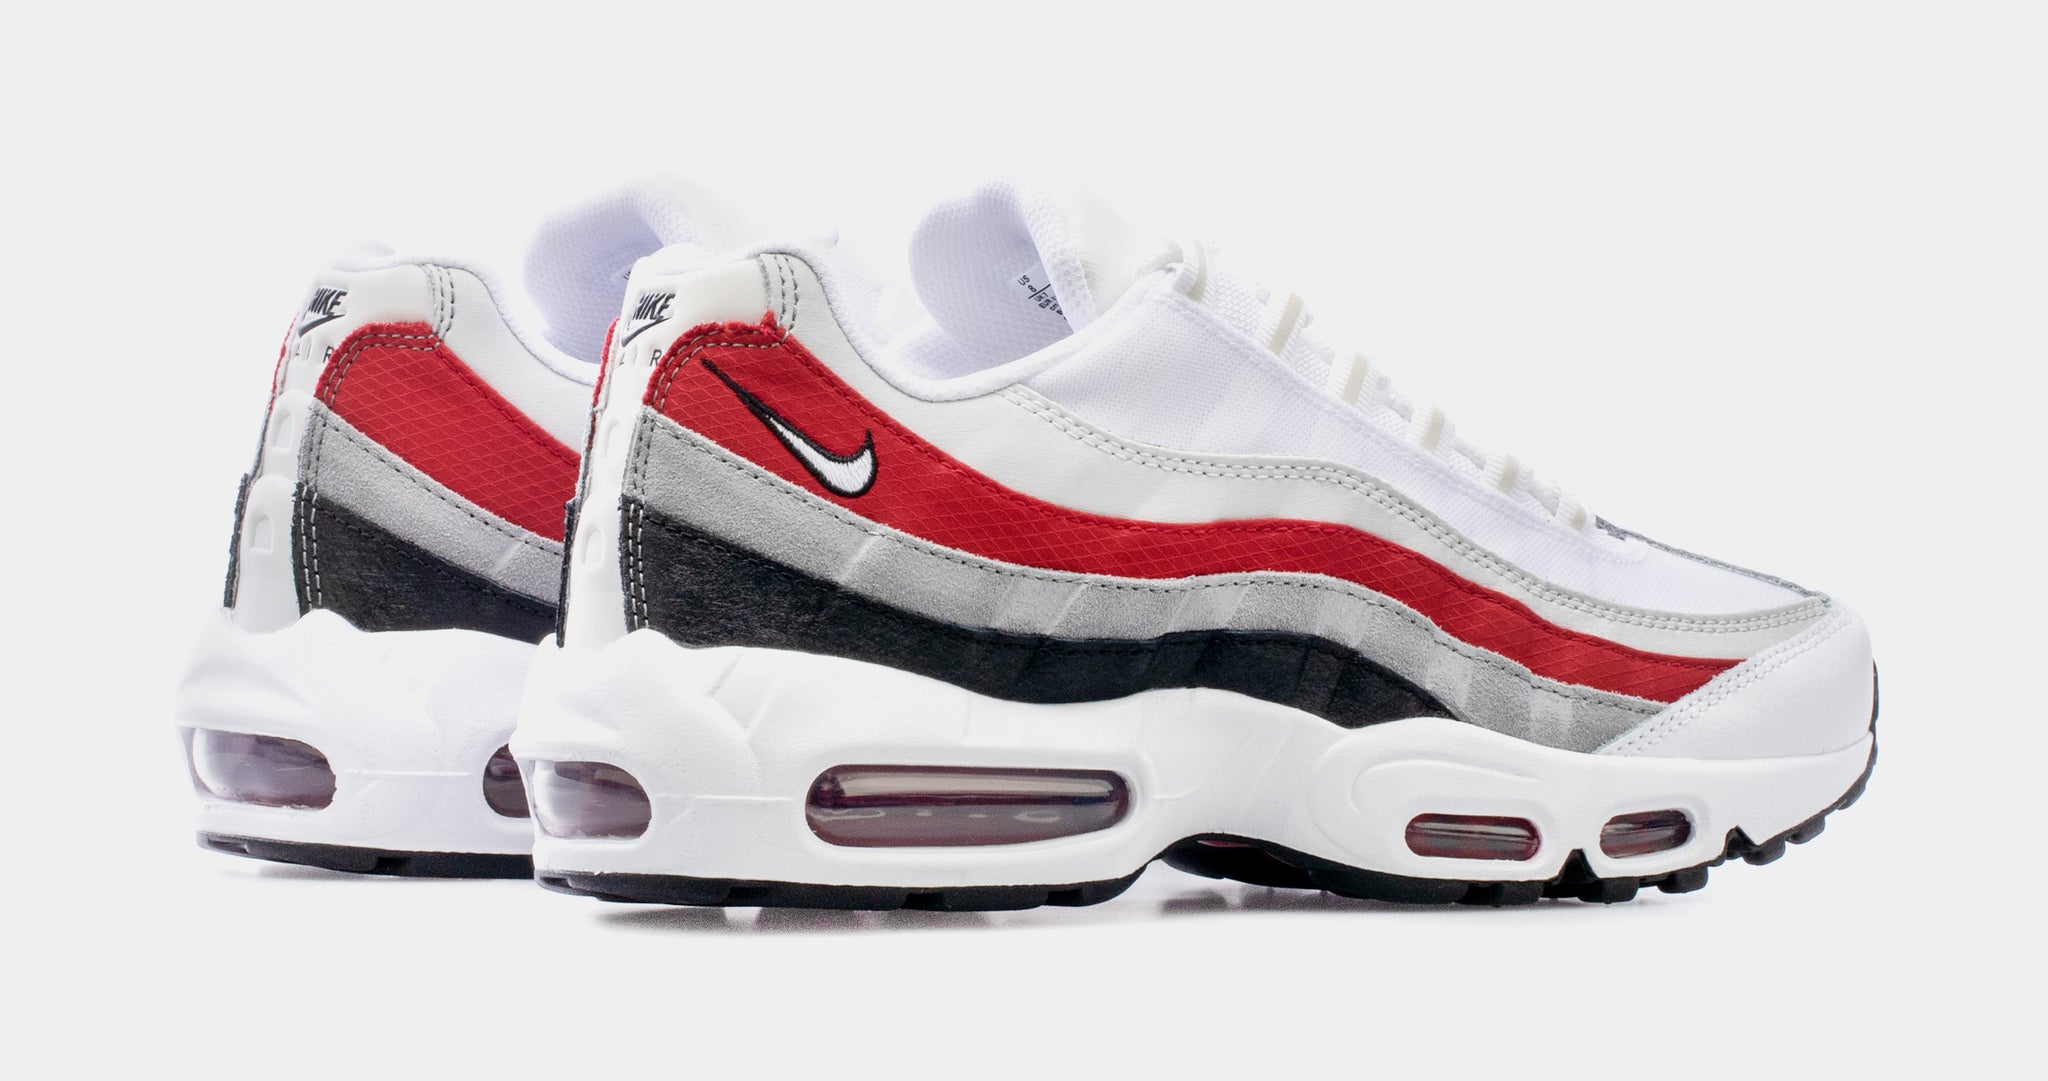 verachten voelen investering Nike Air Max 95 Essential Mens Running Shoes White Red DQ3430-001 – Shoe  Palace